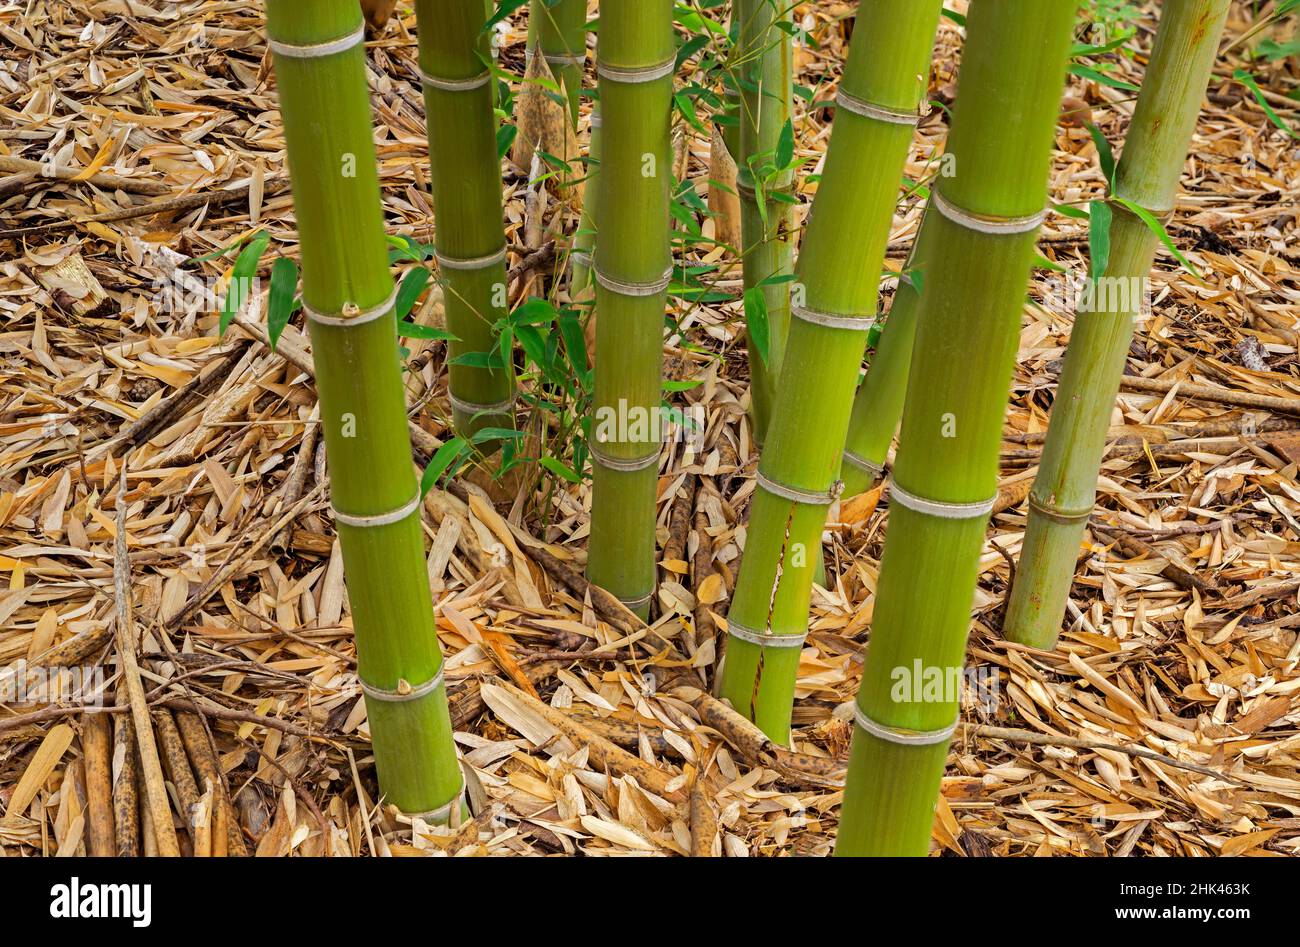 USA, Oregon, Portland. Hoyt Arboretum, Bamboo (Phyllostachys parvifolia), this cold tolerant species is native to China. Stock Photo